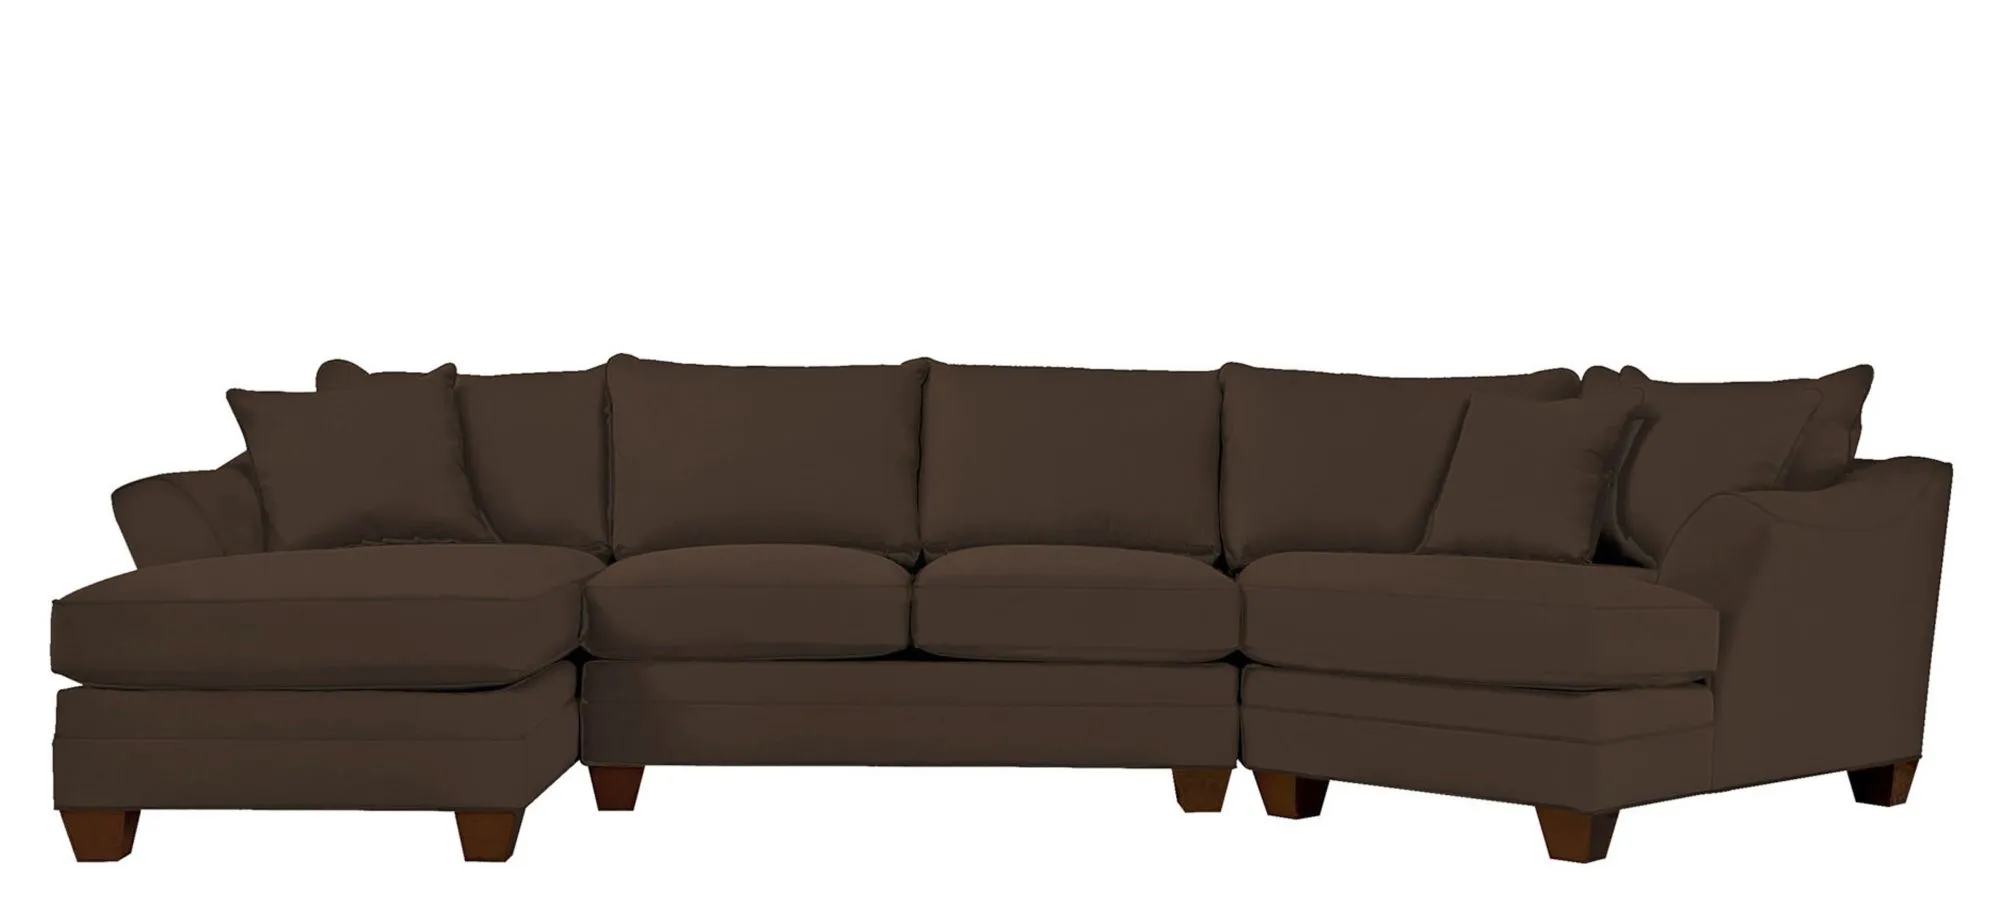 Foresthill 3-pc. Left Hand Facing Sectional Sofa in Suede So Soft Chocolate by H.M. Richards